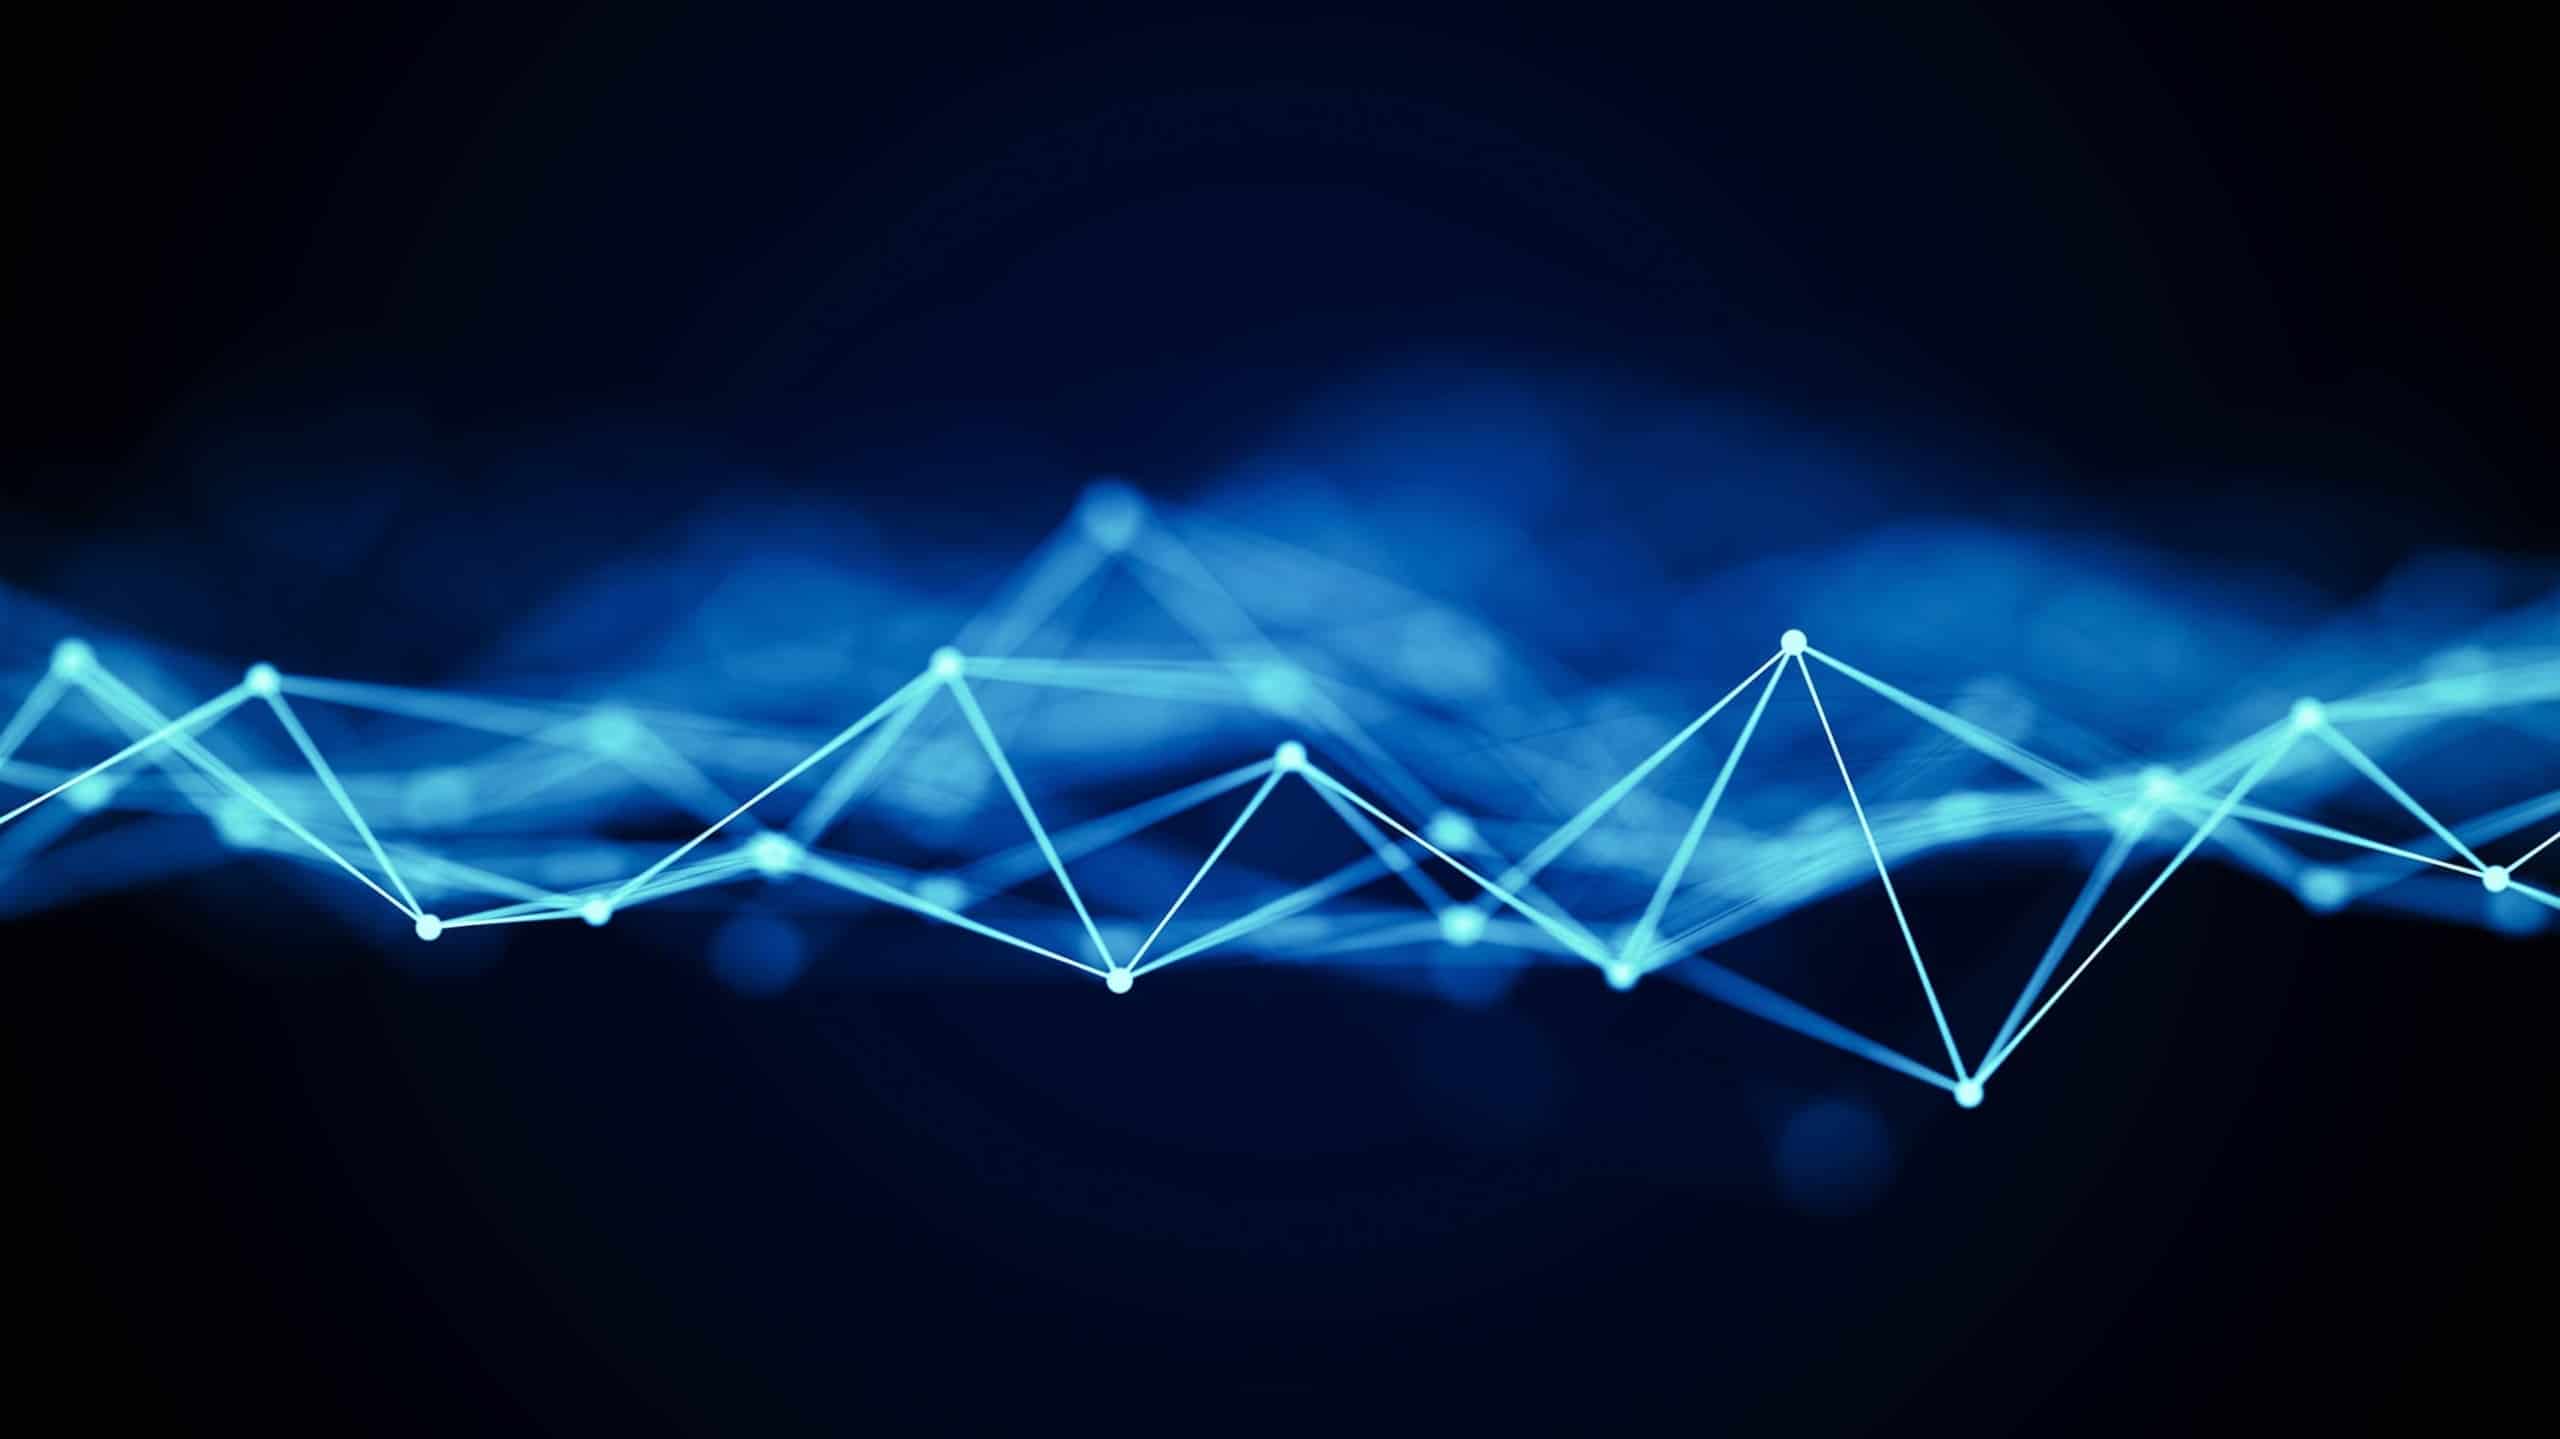 Abstract digital background featuring blue glowing interconnected lines forming peaks and valleys on a dark blue backdrop, symbolizing network connectivity or data flow.